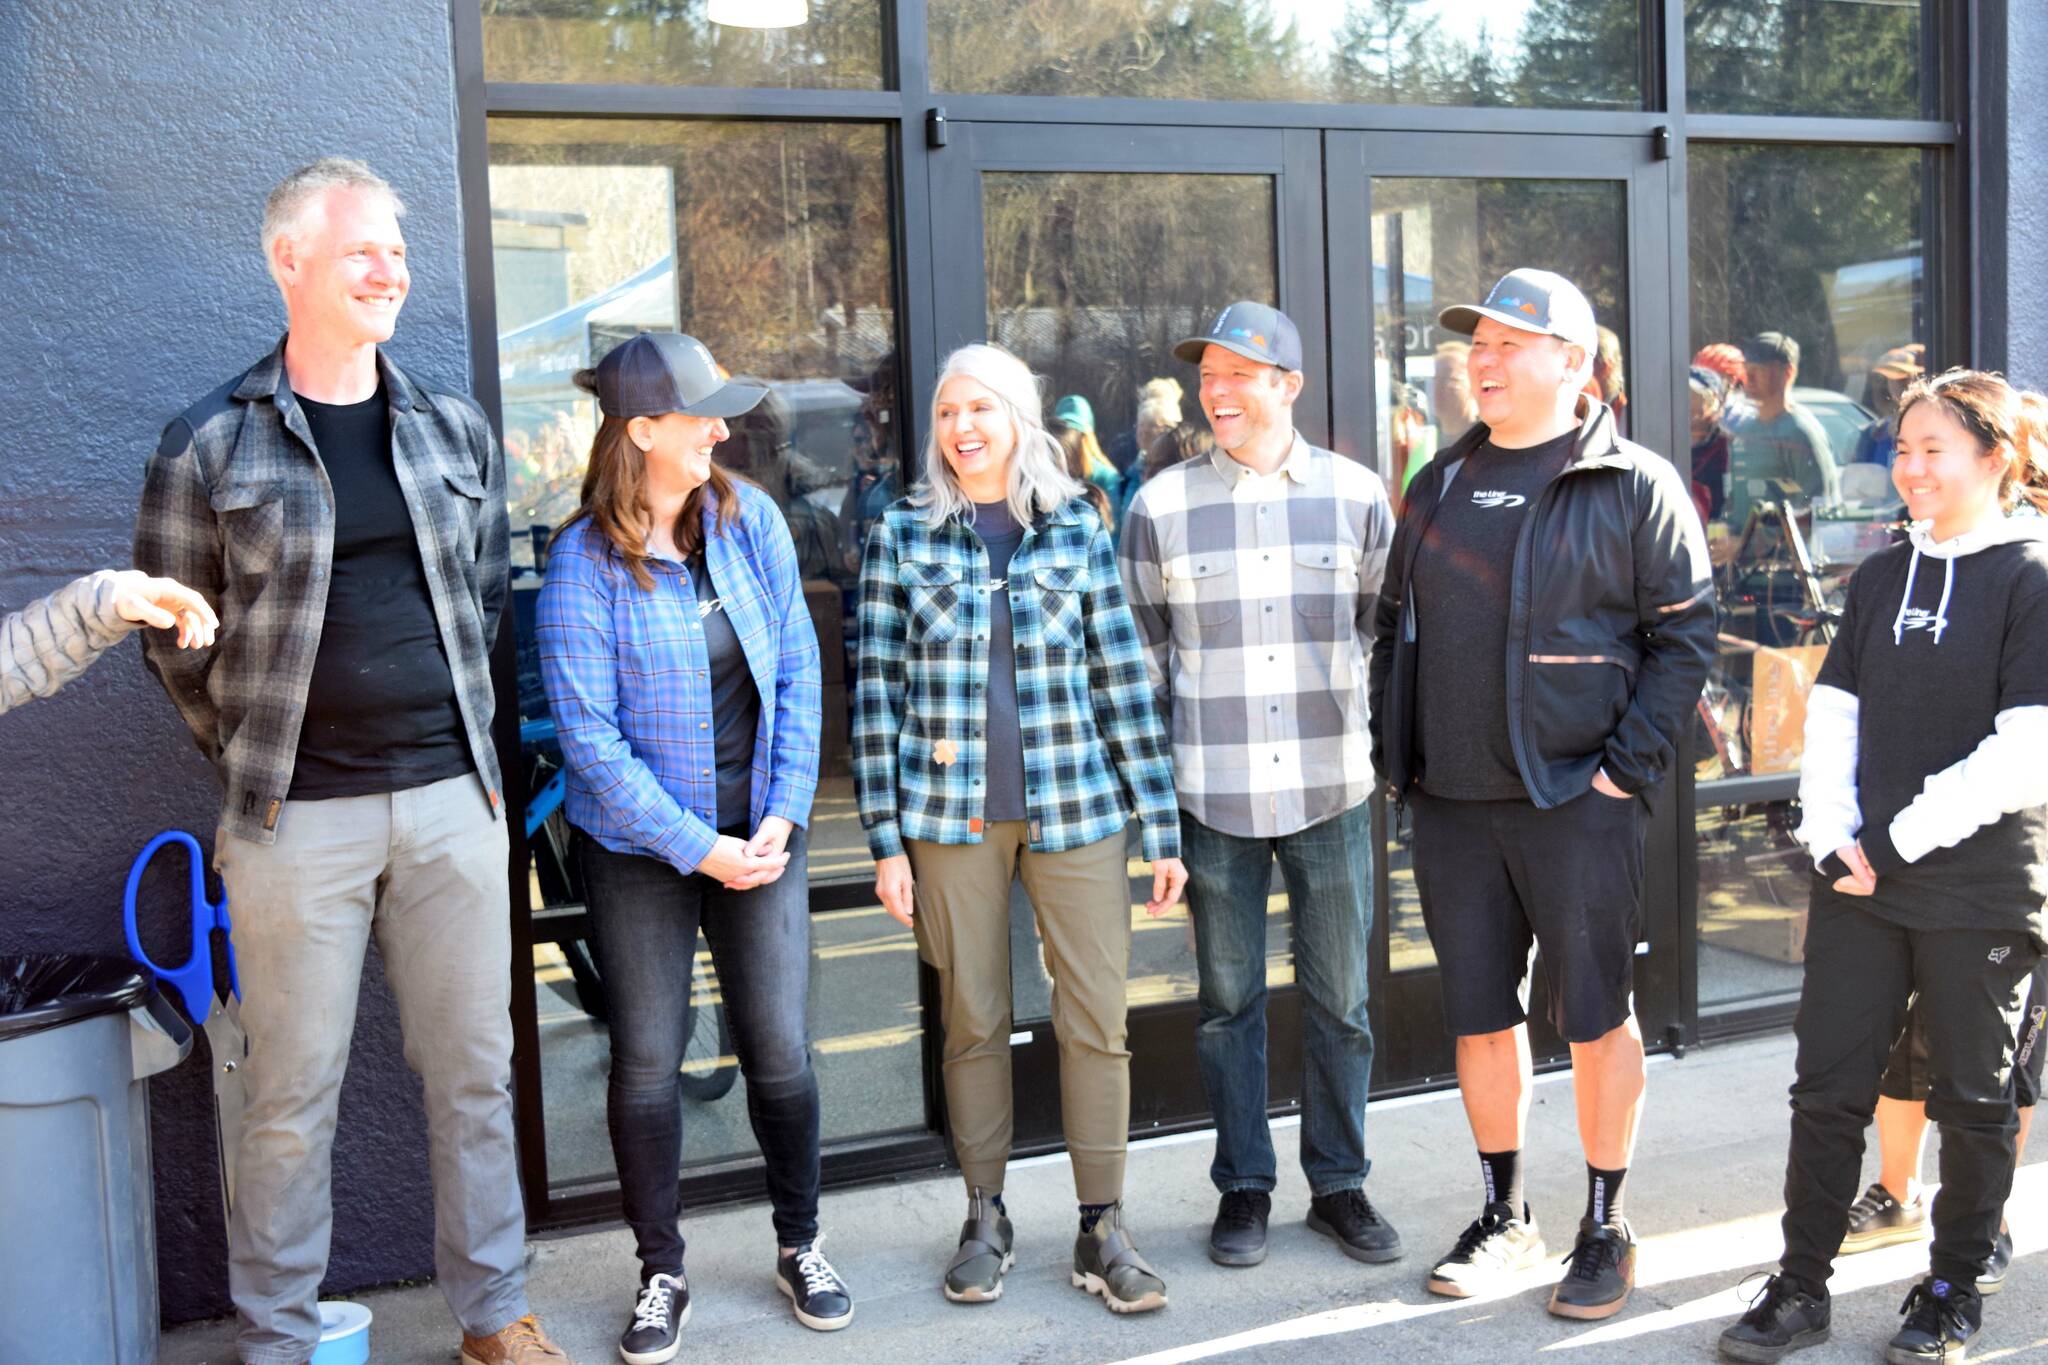 Owners of The Line Bike Experience at their grand opening on March 18. From left: Michael Kunz, Alex Kunz, Sheryl Tullis, James Skinner and Steve Tullis. Photo Conor Wilson/Valley Record.